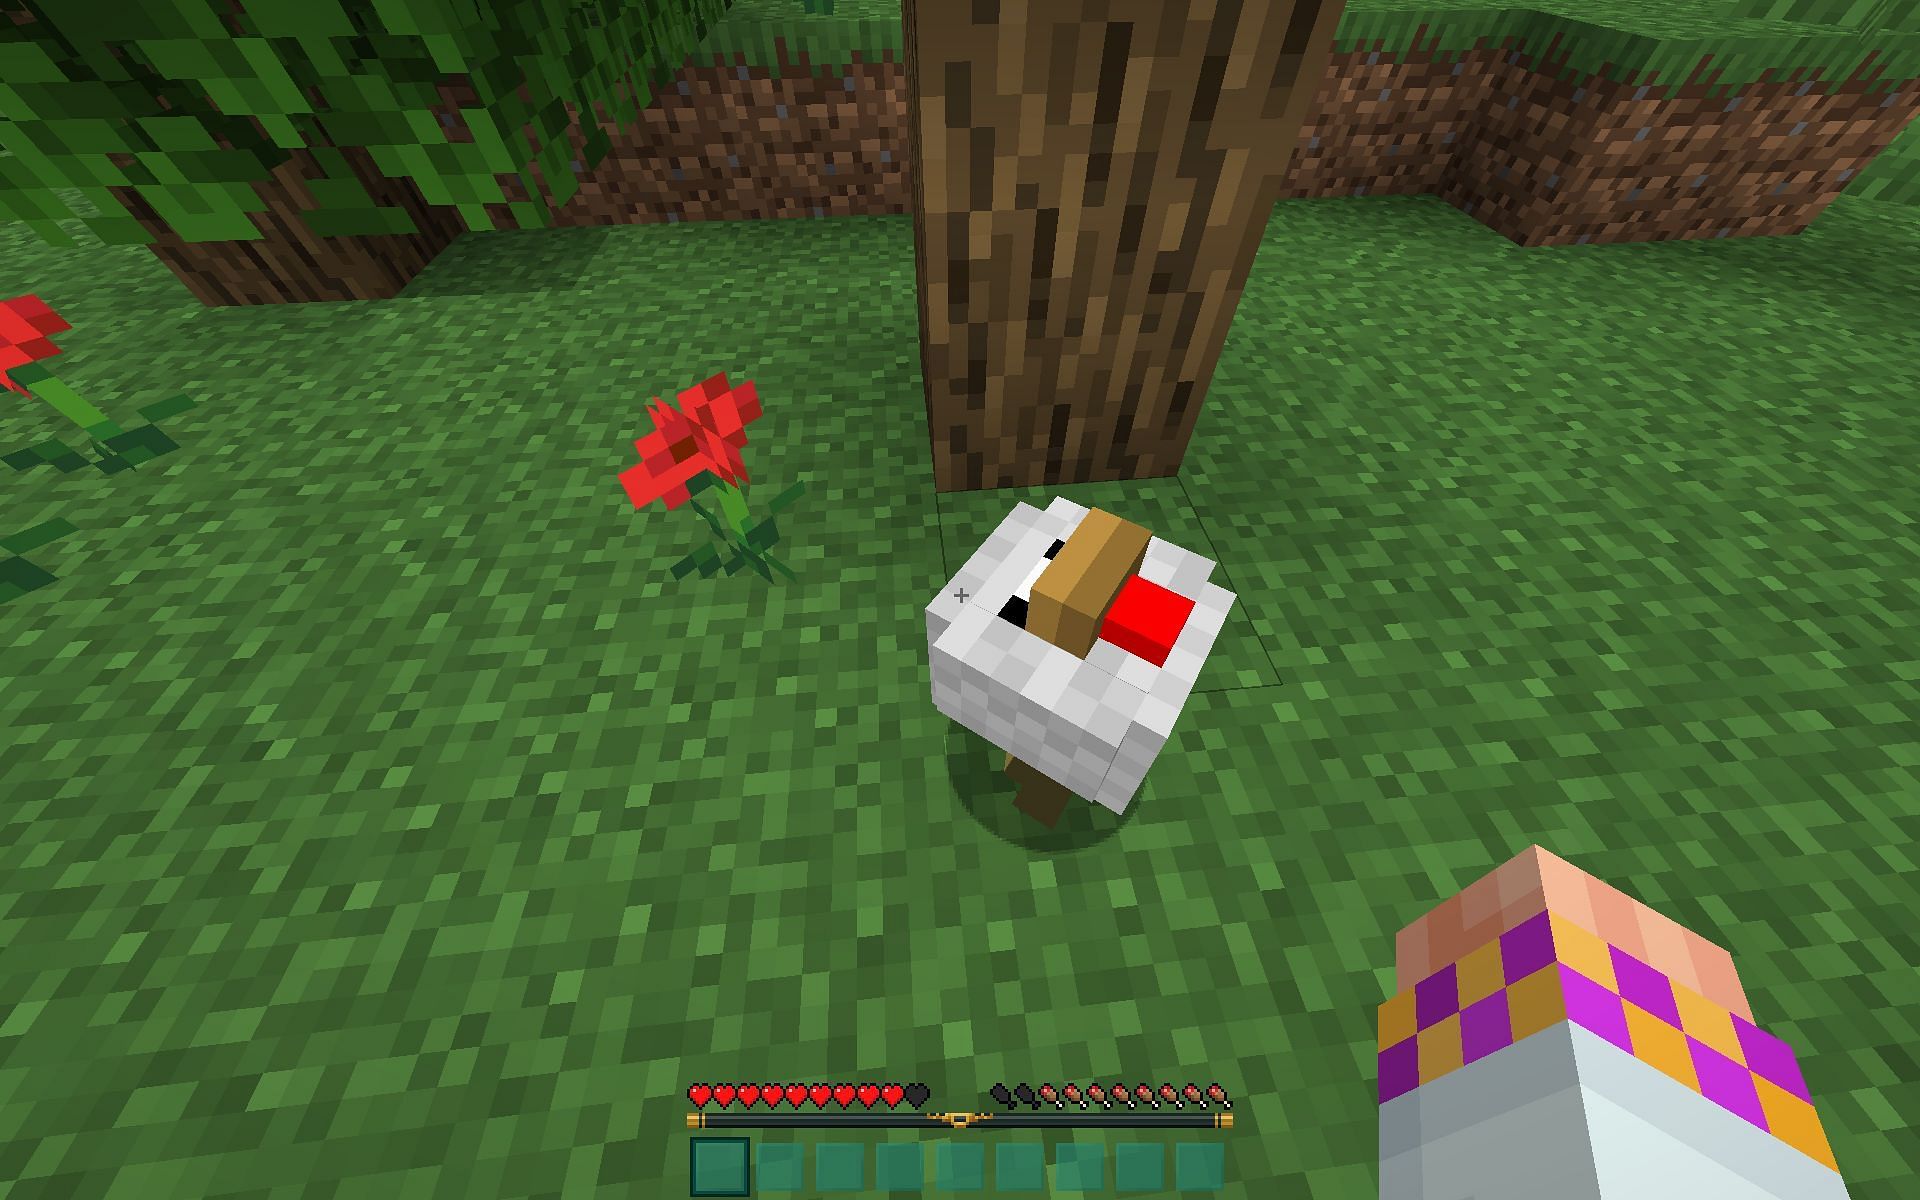 players can tame chickens in Minecraft (image via Mojang)